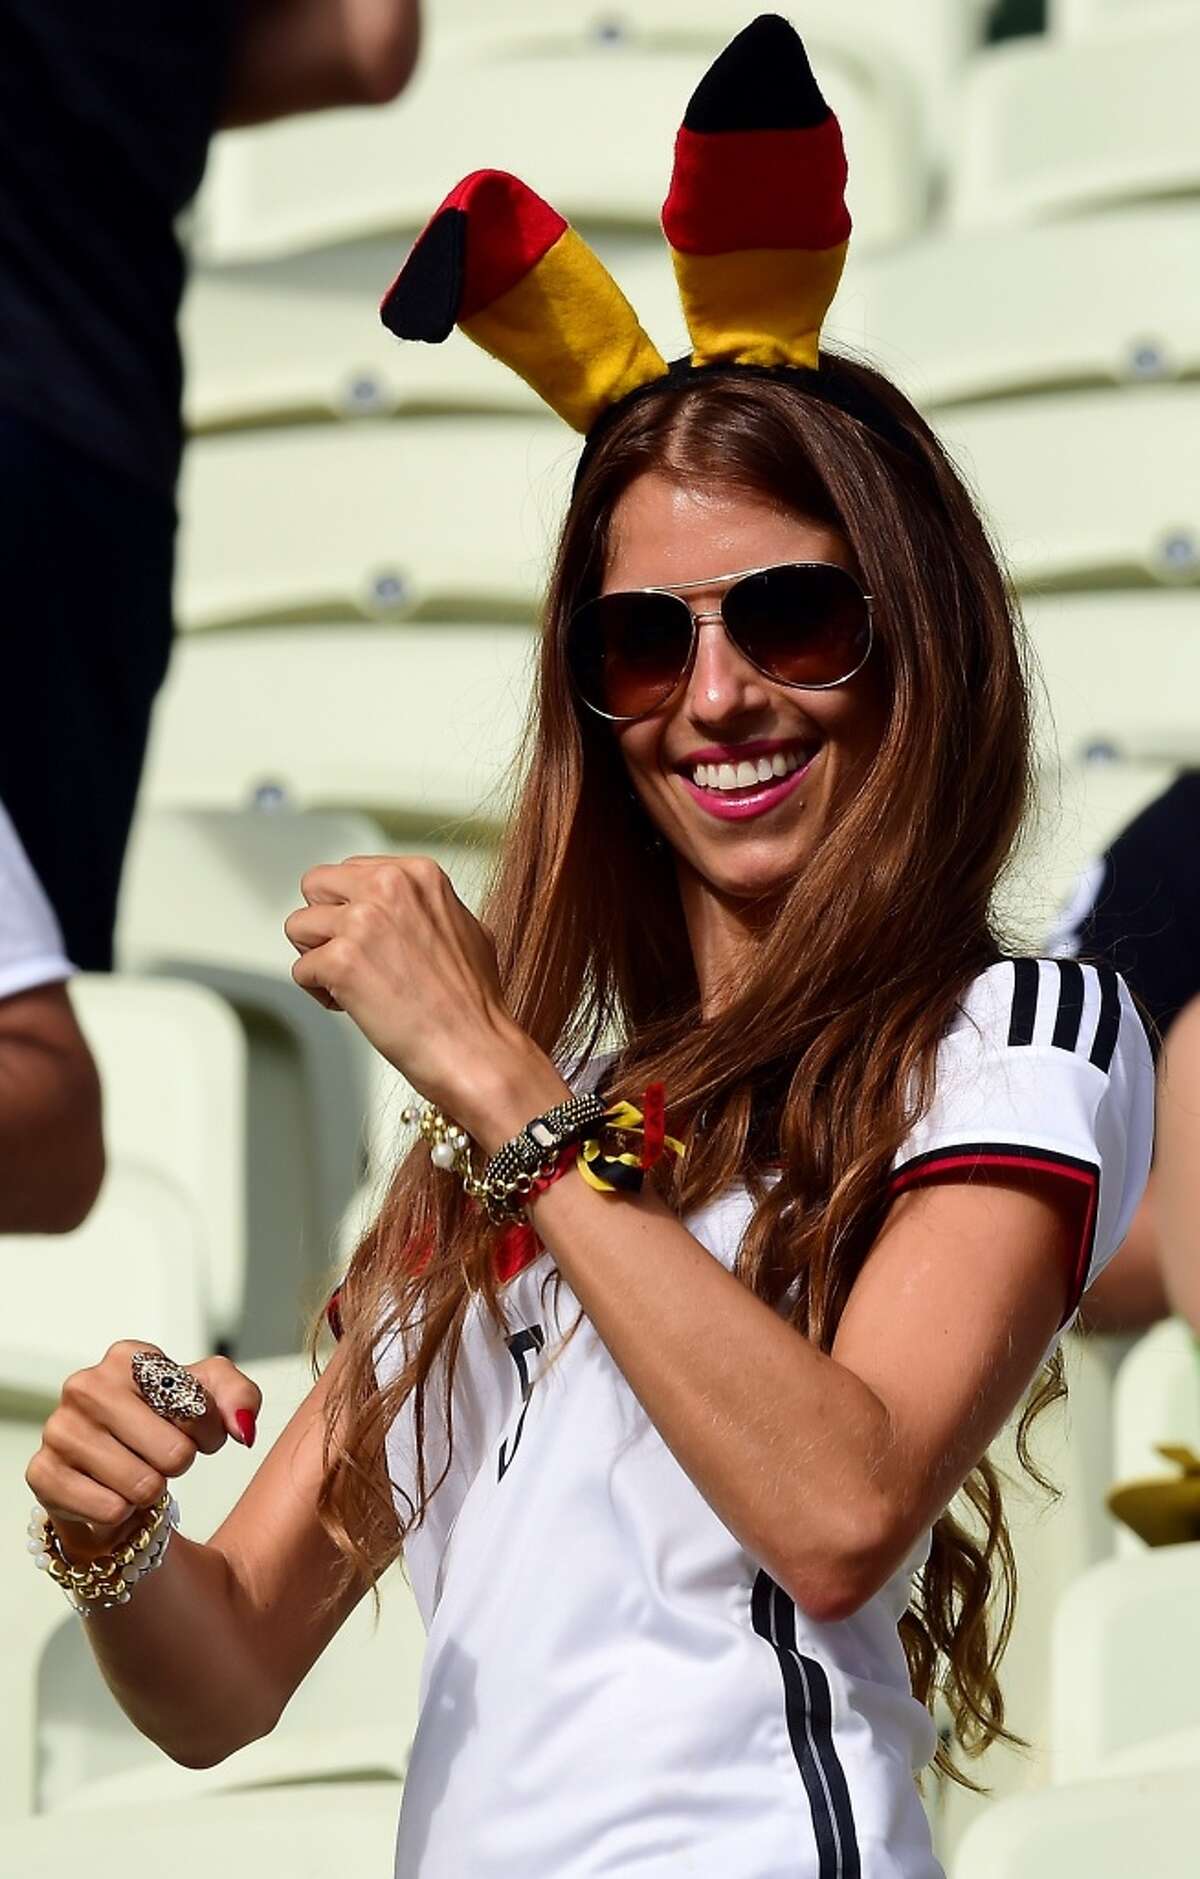 Female fans at the 2014 FIFA World Cup in Brazil